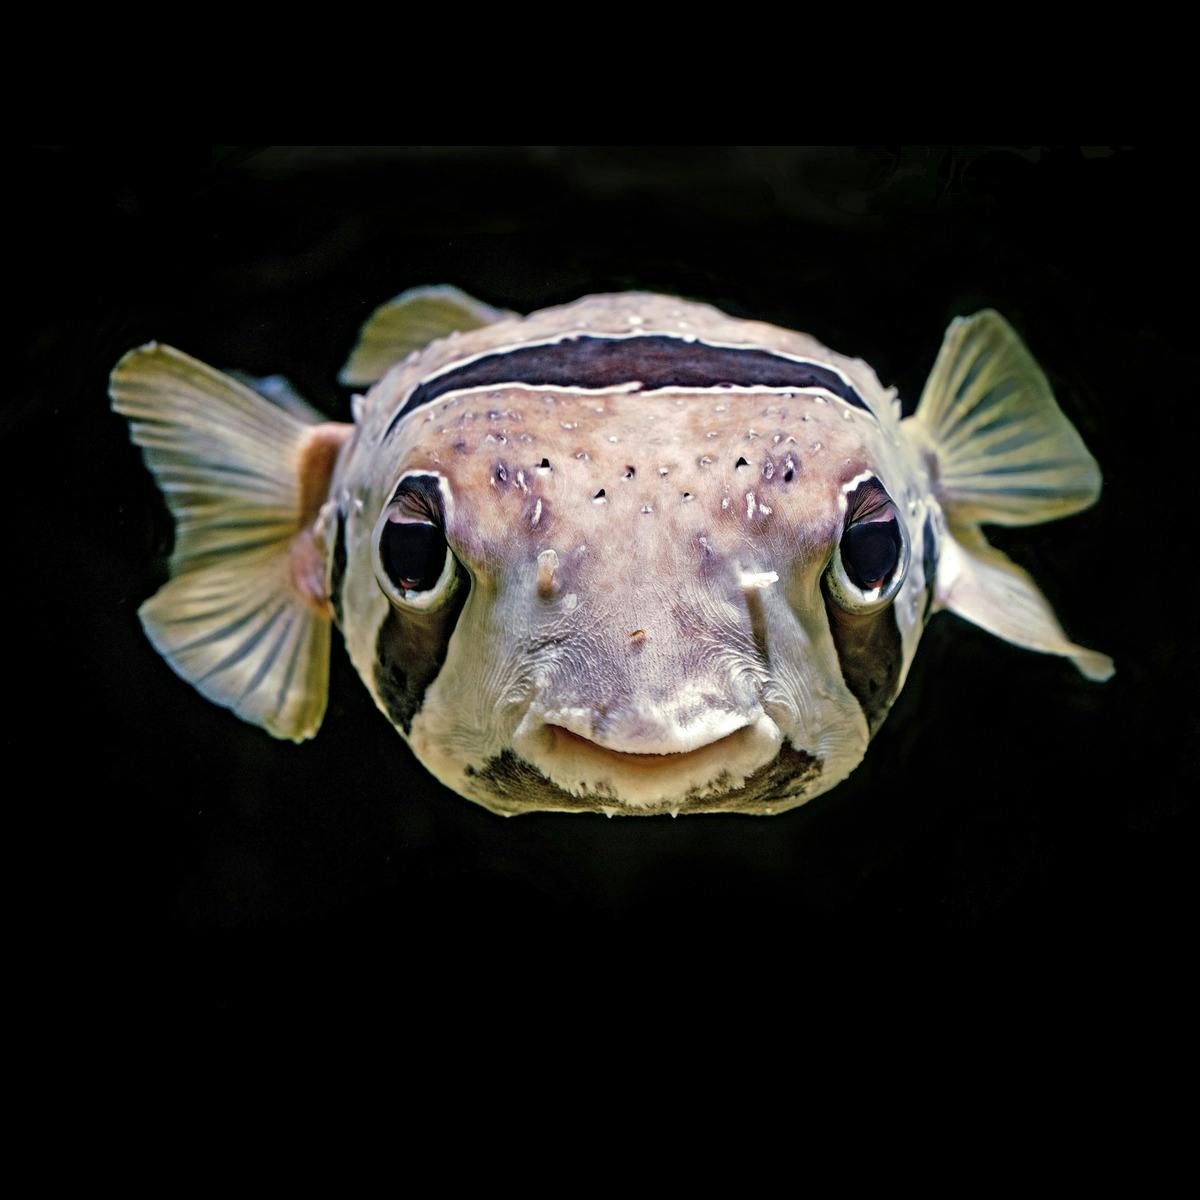 Photo of a unpuffed blowfish looking directly into the camera.